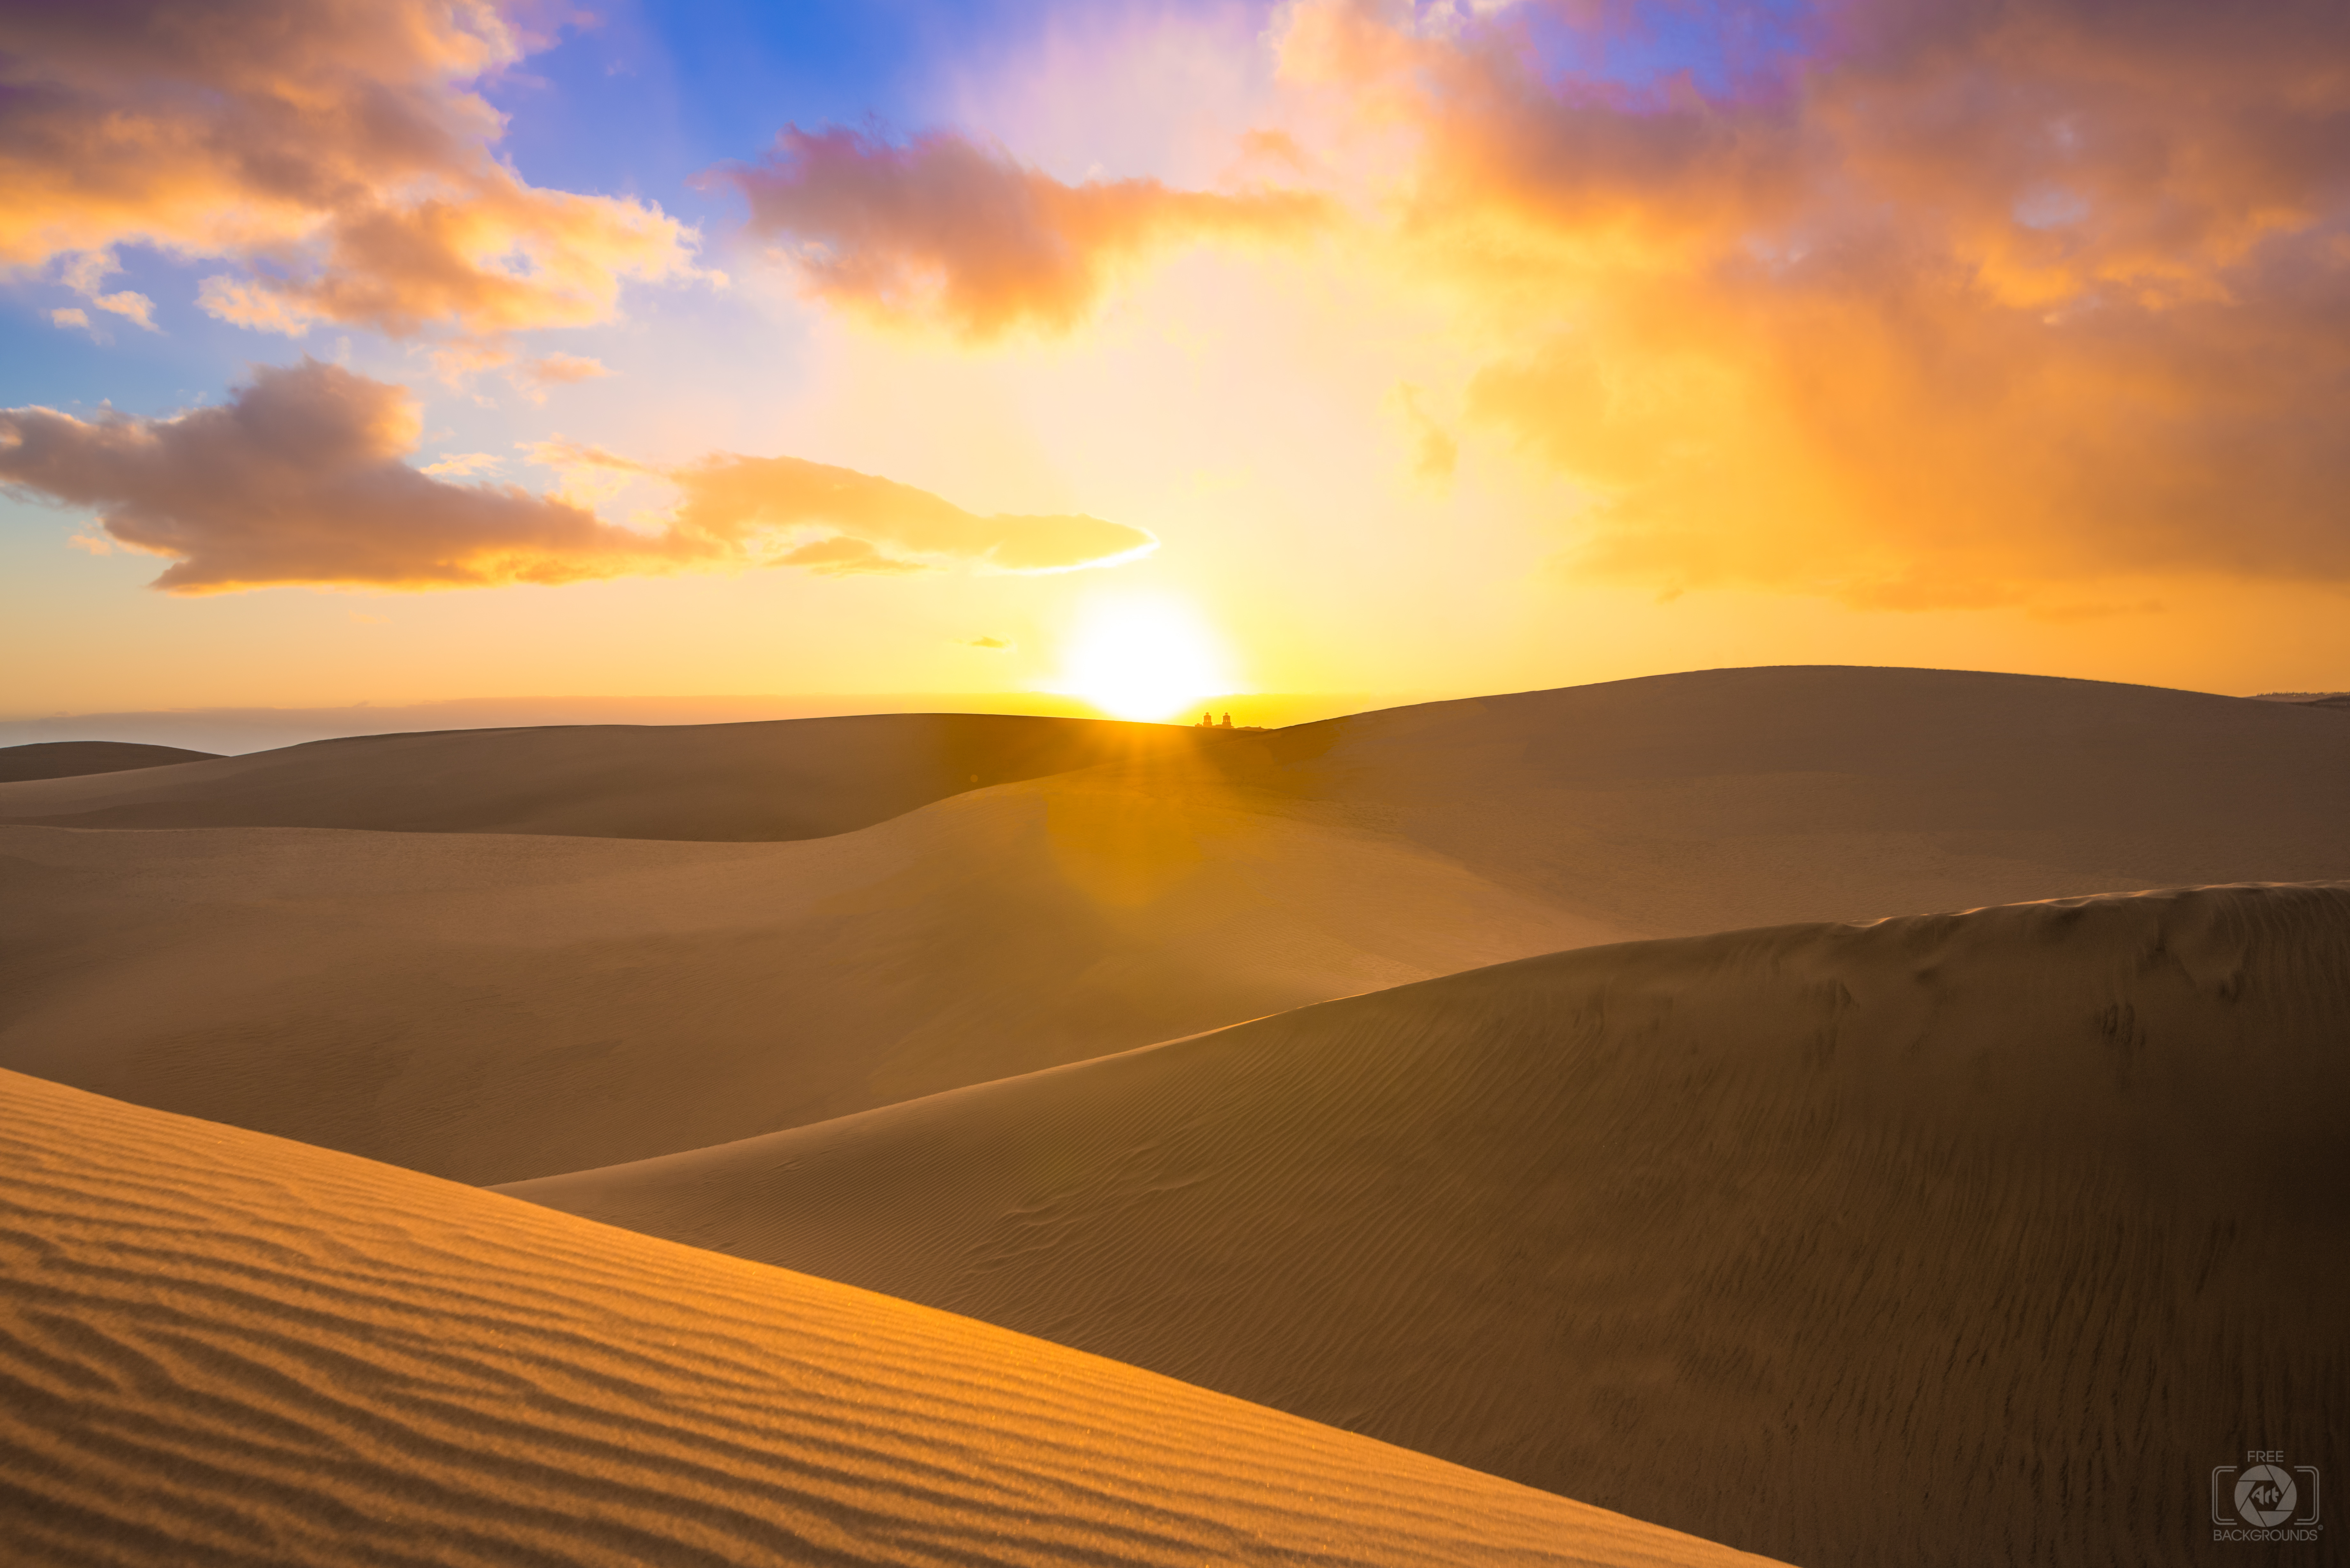 Desert Sunset Background - High-quality Free Backgrounds